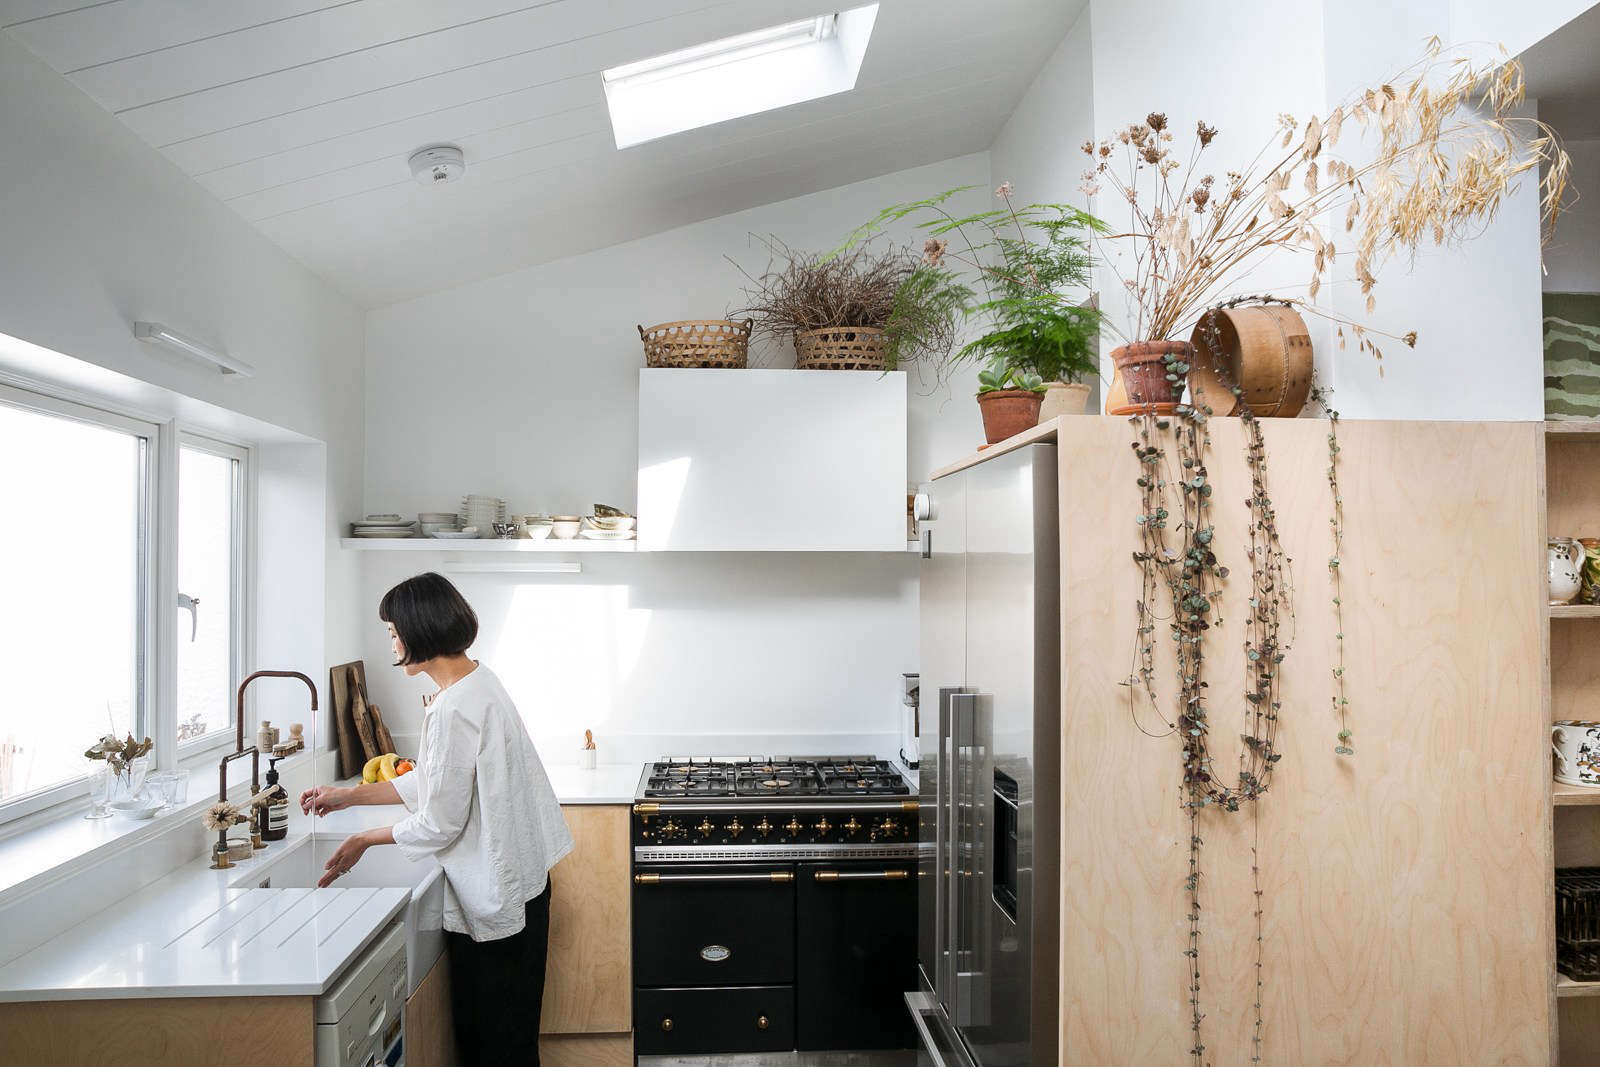 Steal This Look: A Botanical Stylist's Creative Kitchen Remodel in London - Remodelista